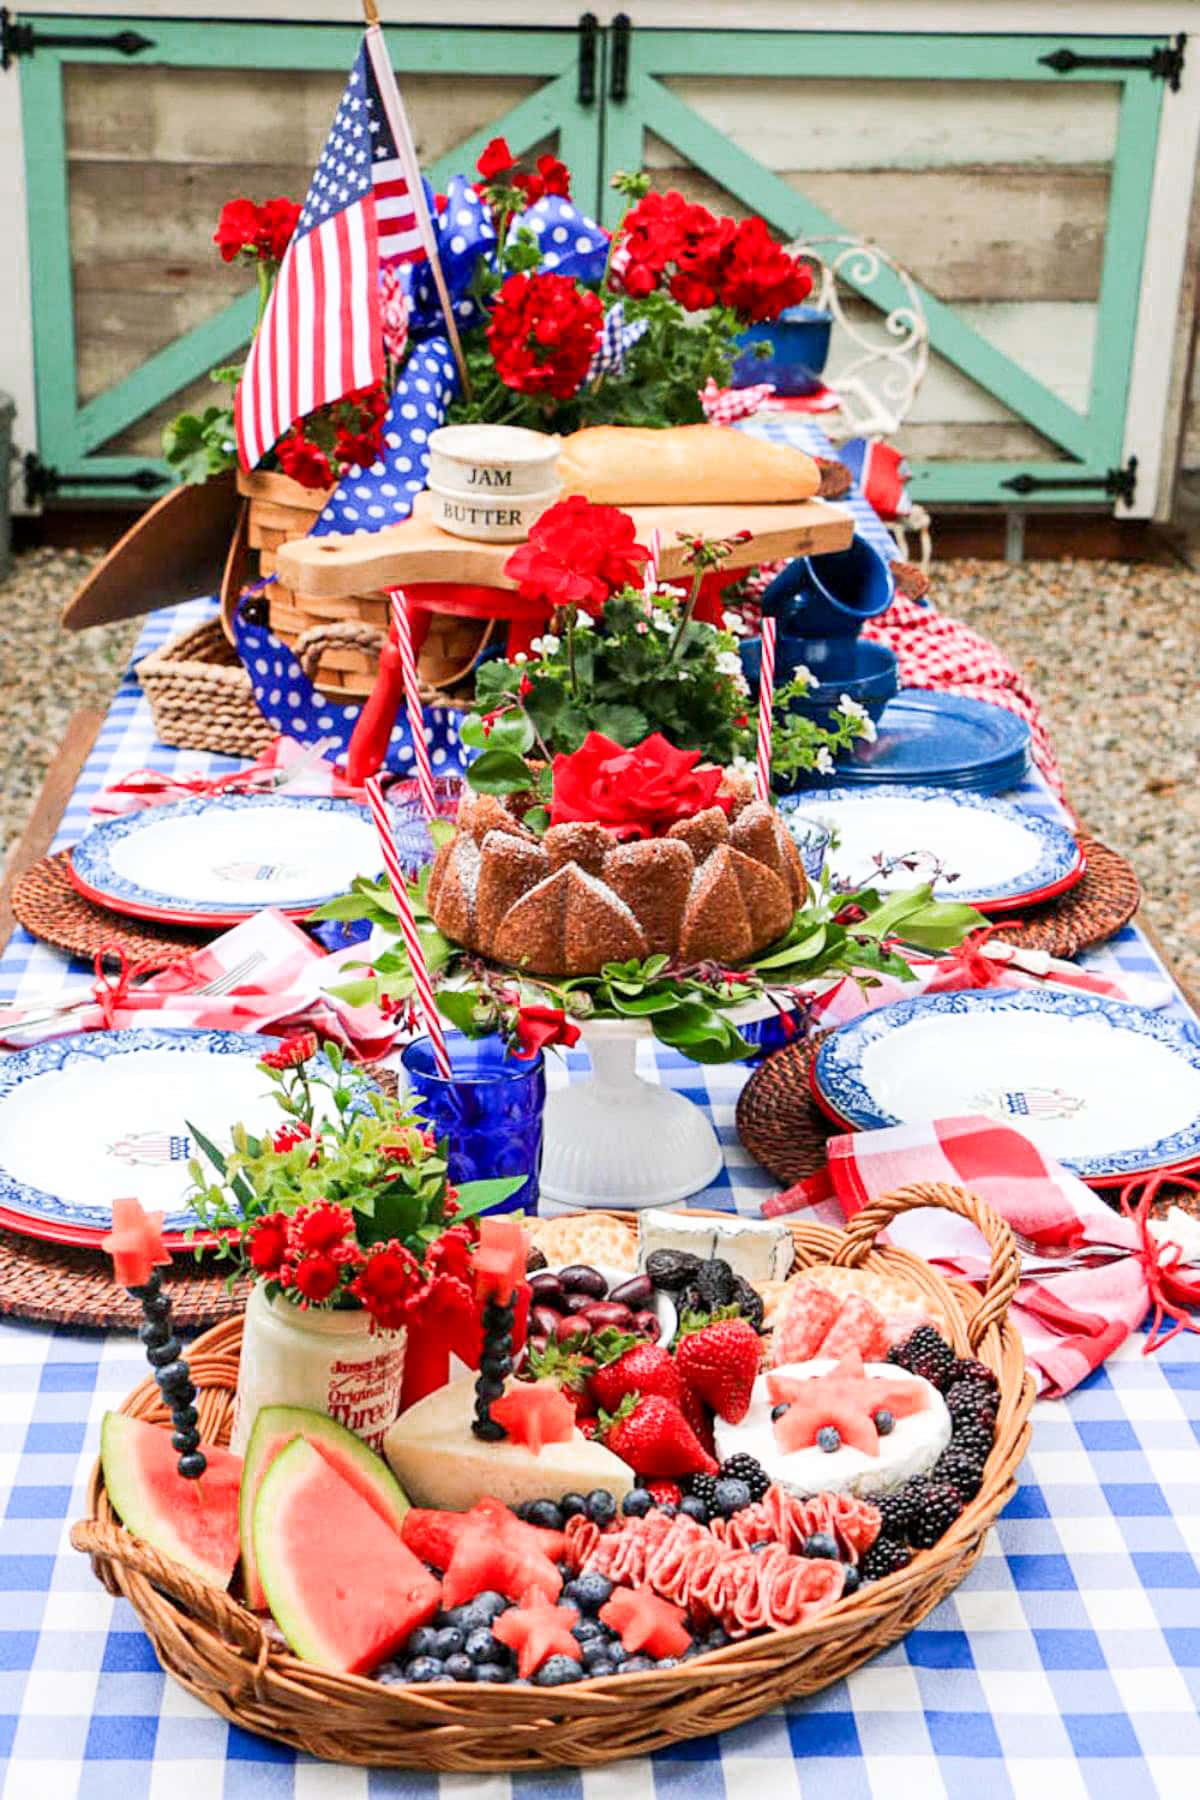 Decorating a patriotic picnic table  with American Flags, flowers, and summer bbq food